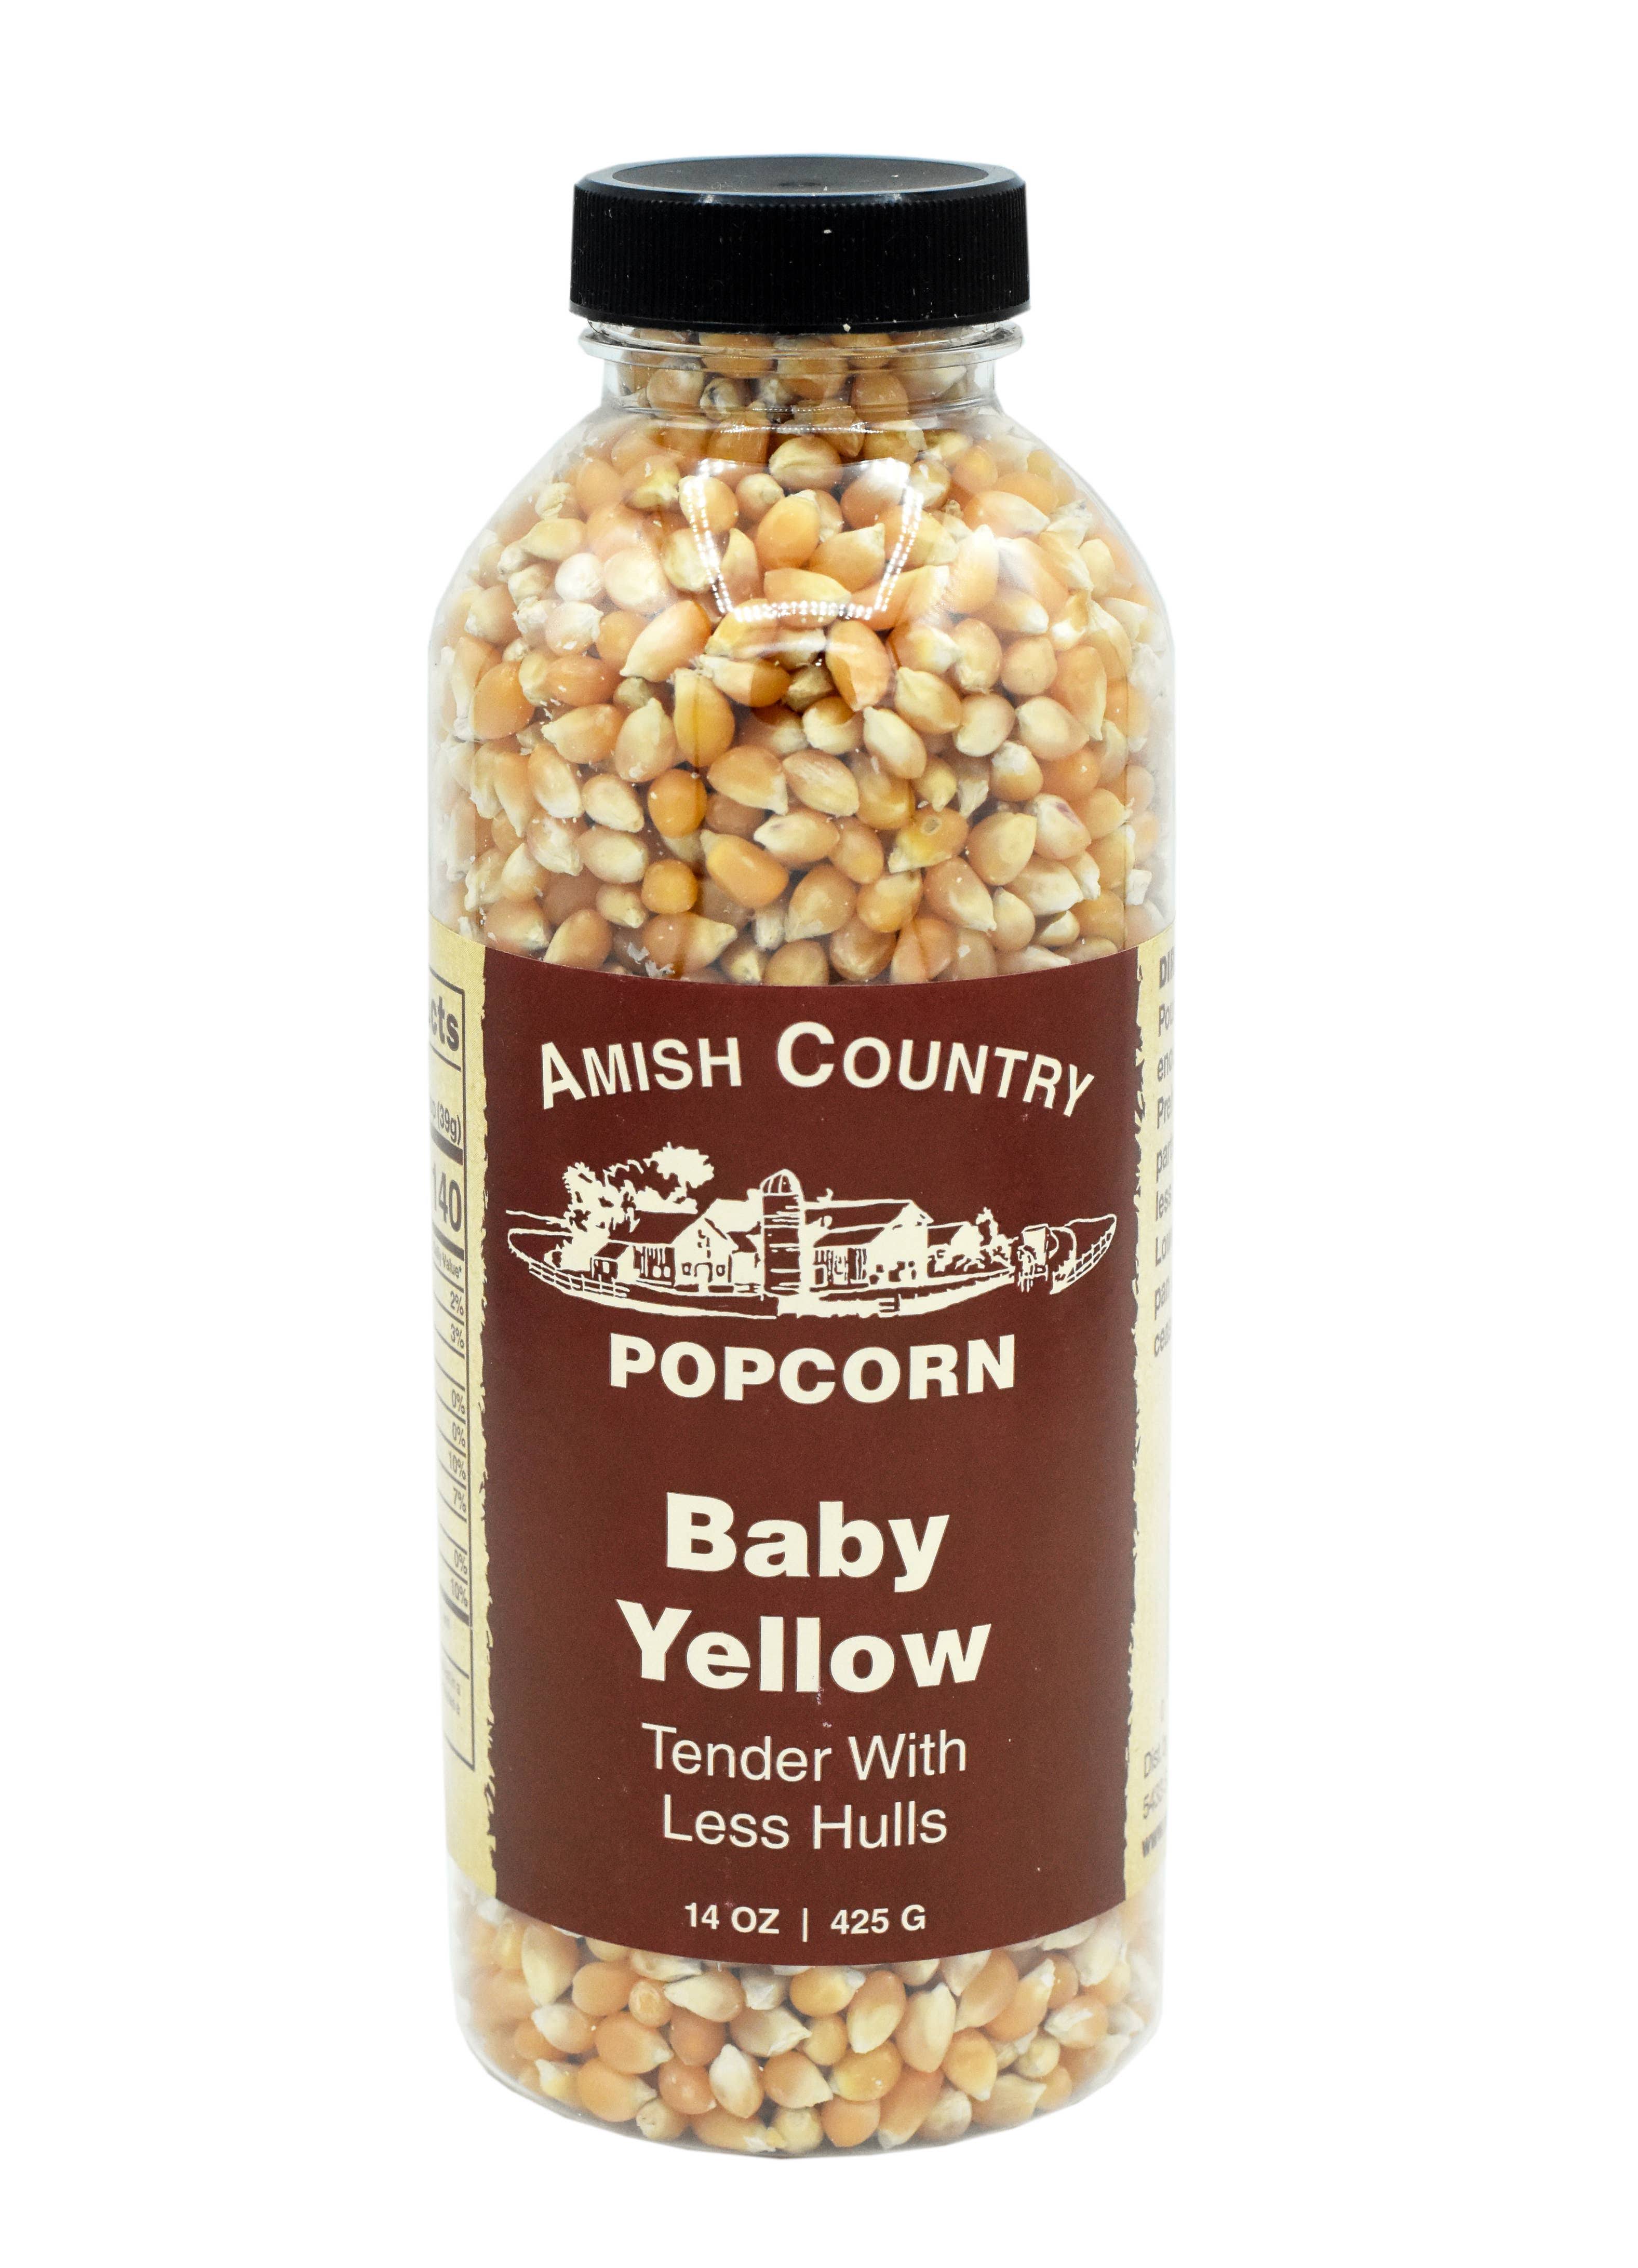 Amish Country Baby Yellow Popcorn Bottle, 14 oz